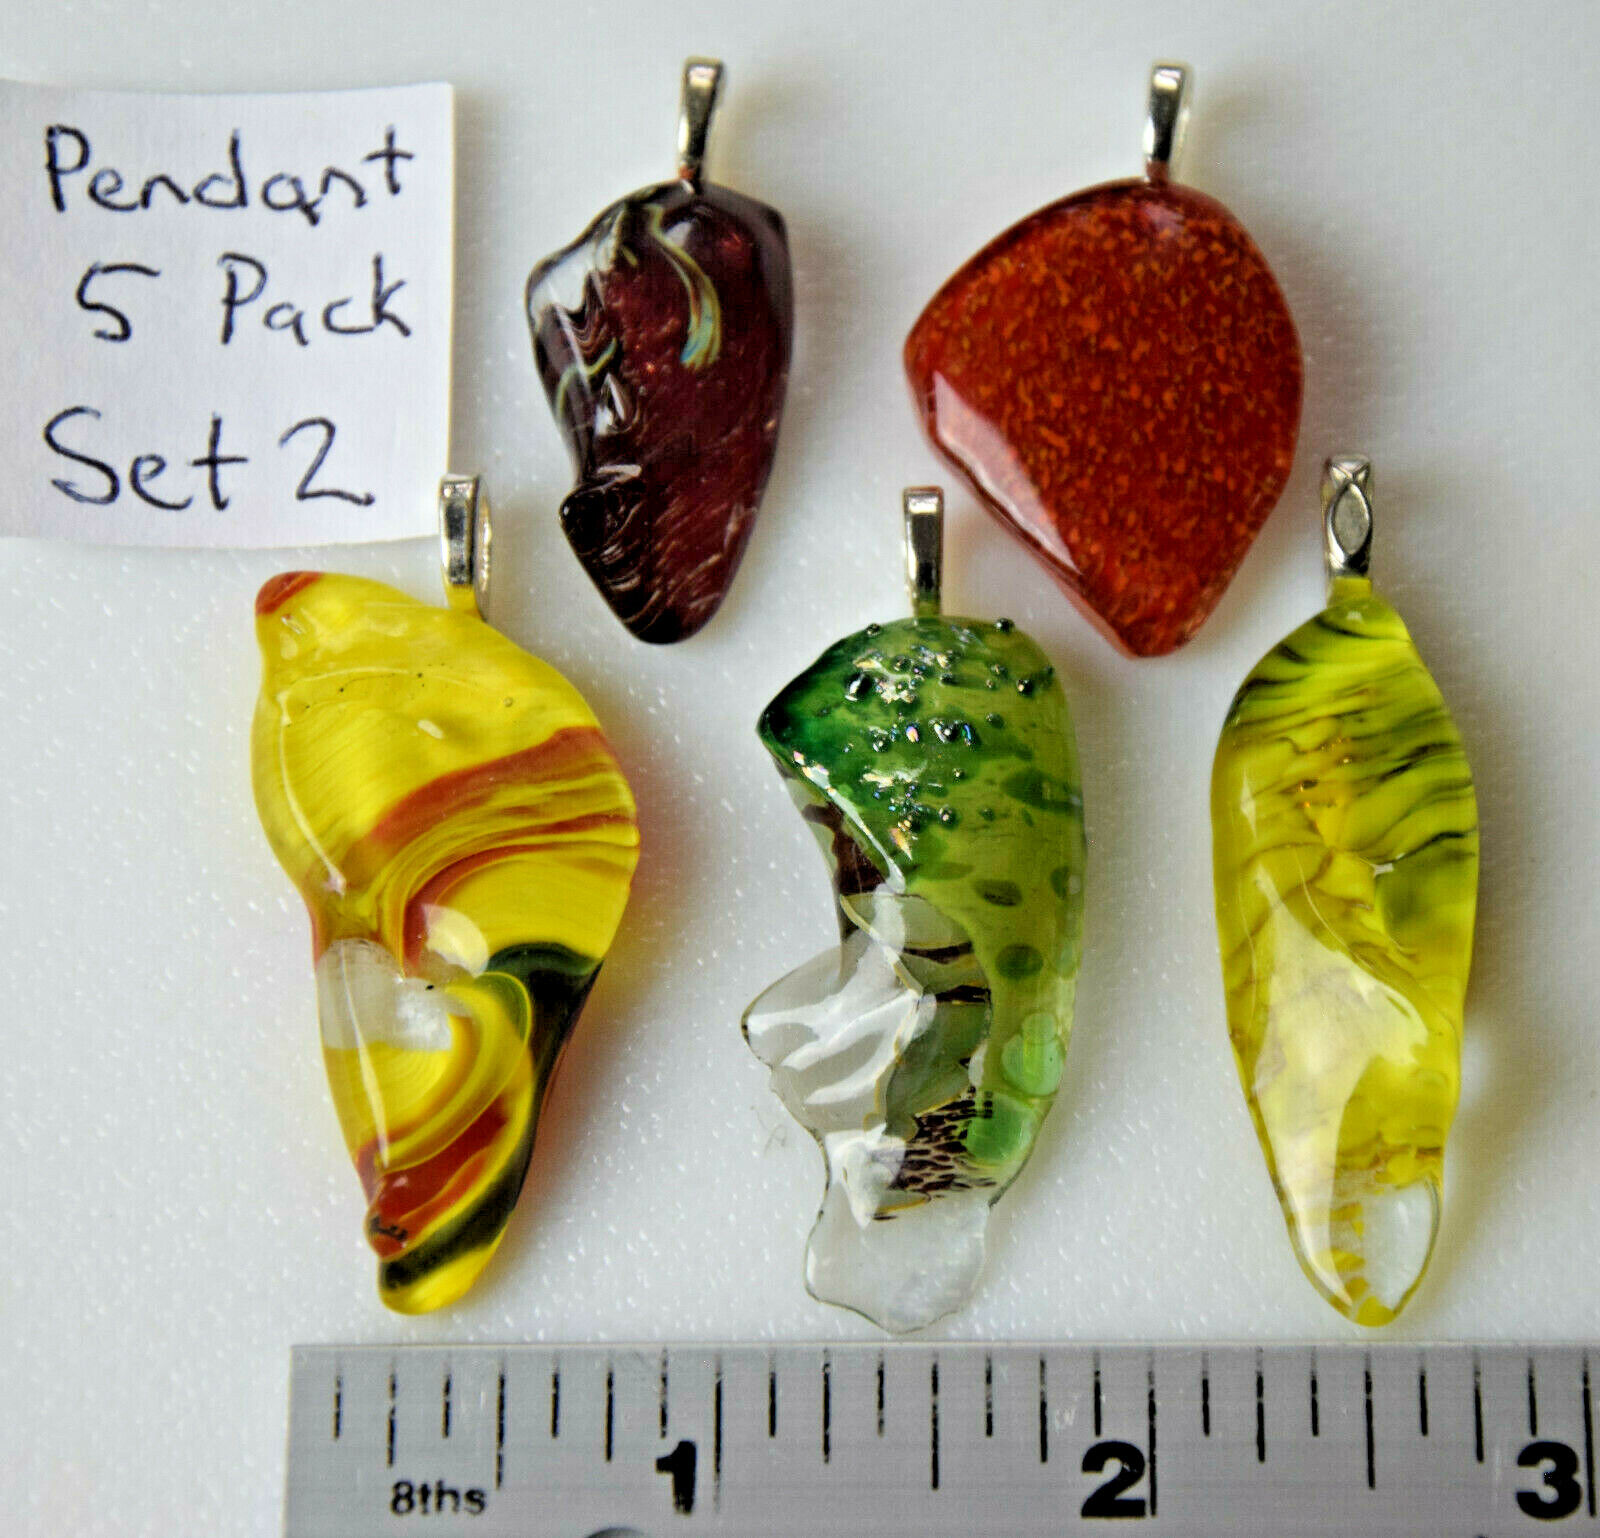 s2 Made In USA Fused Glass Pendants 5 Pack + 5 pcs 18" Soft Leather Necklace Artisan